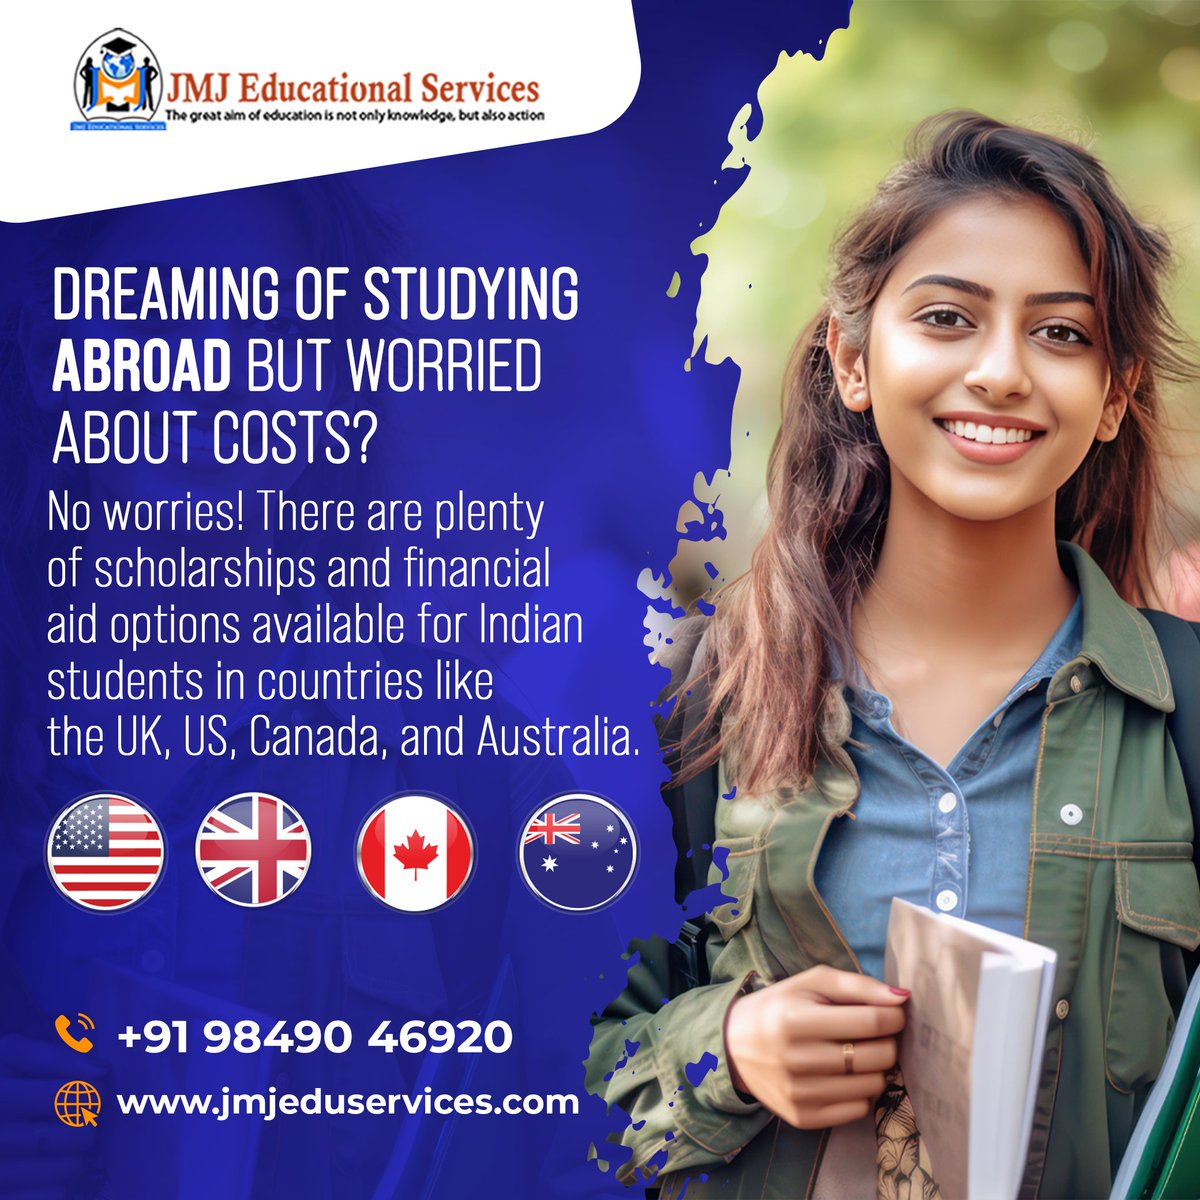 Dreaming of studying abroad but worried about costs? Don't fret! Explore abundant scholarships & financial aid options for Indian students in UK, US, Canada, Australia. Call us: 98490 46920 Visit us: jmjeduservices.com #studyabroad #scholarships #financialaid #international